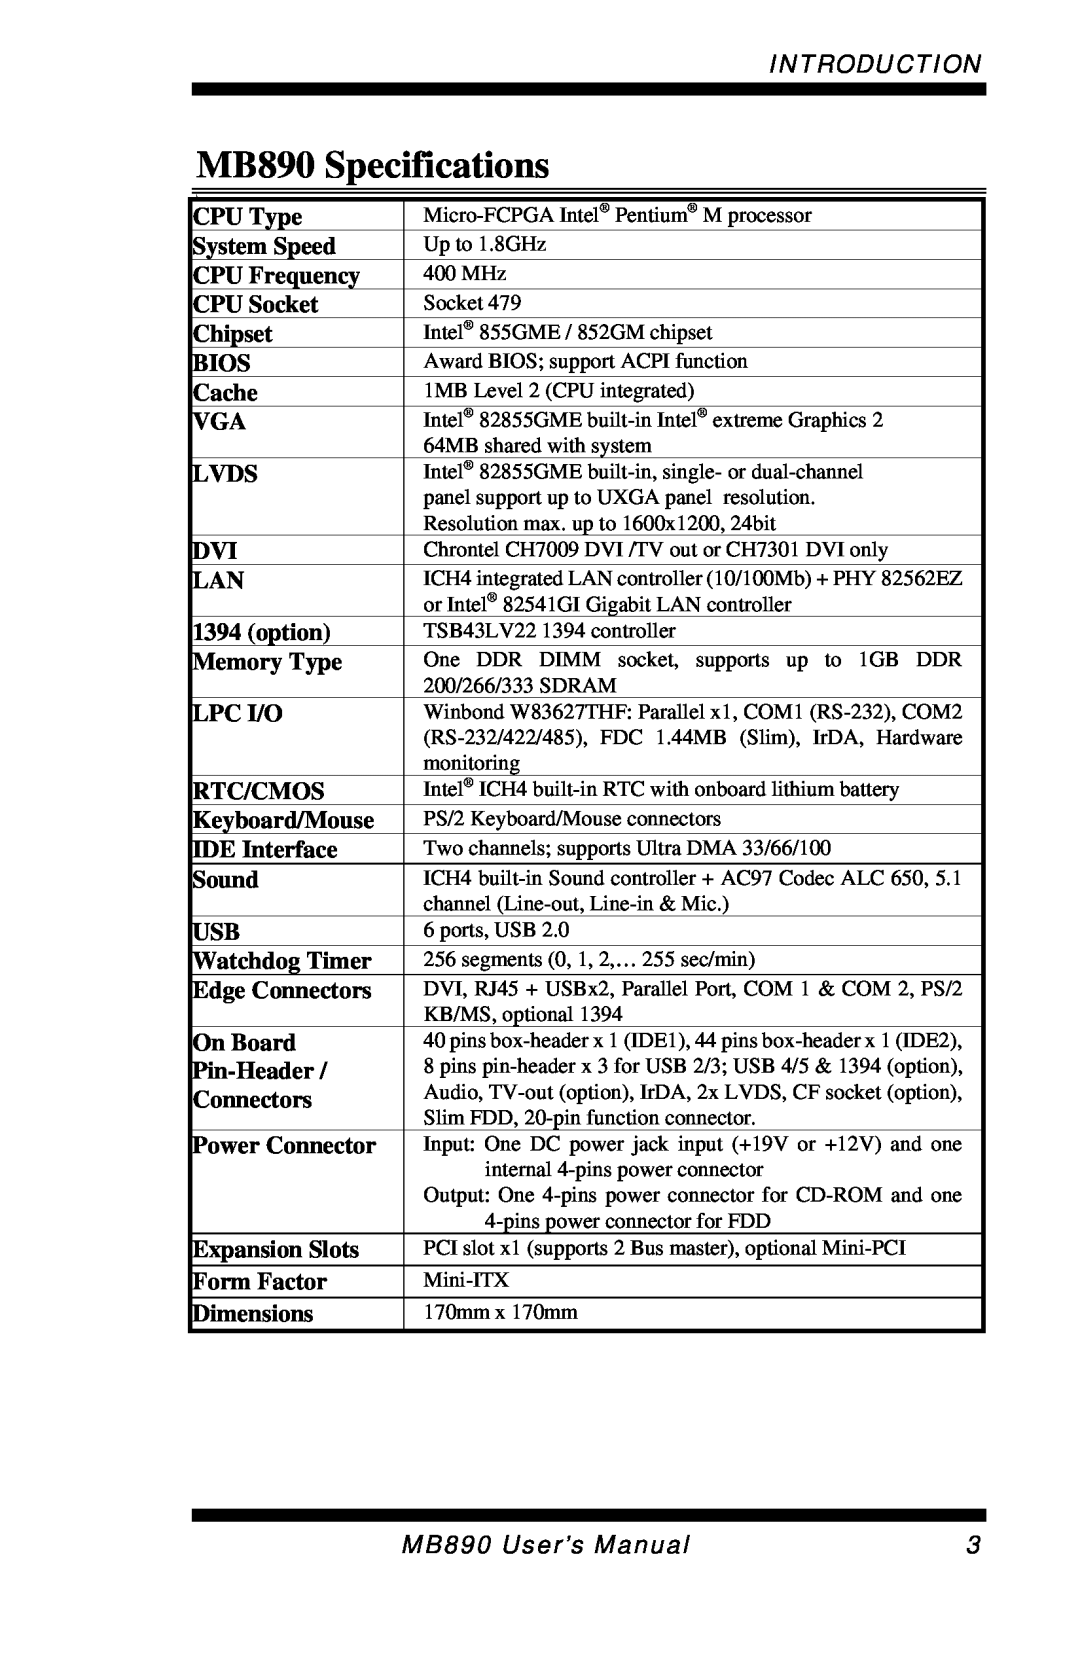 Intel user manual MB890 Specifications, Introduction 